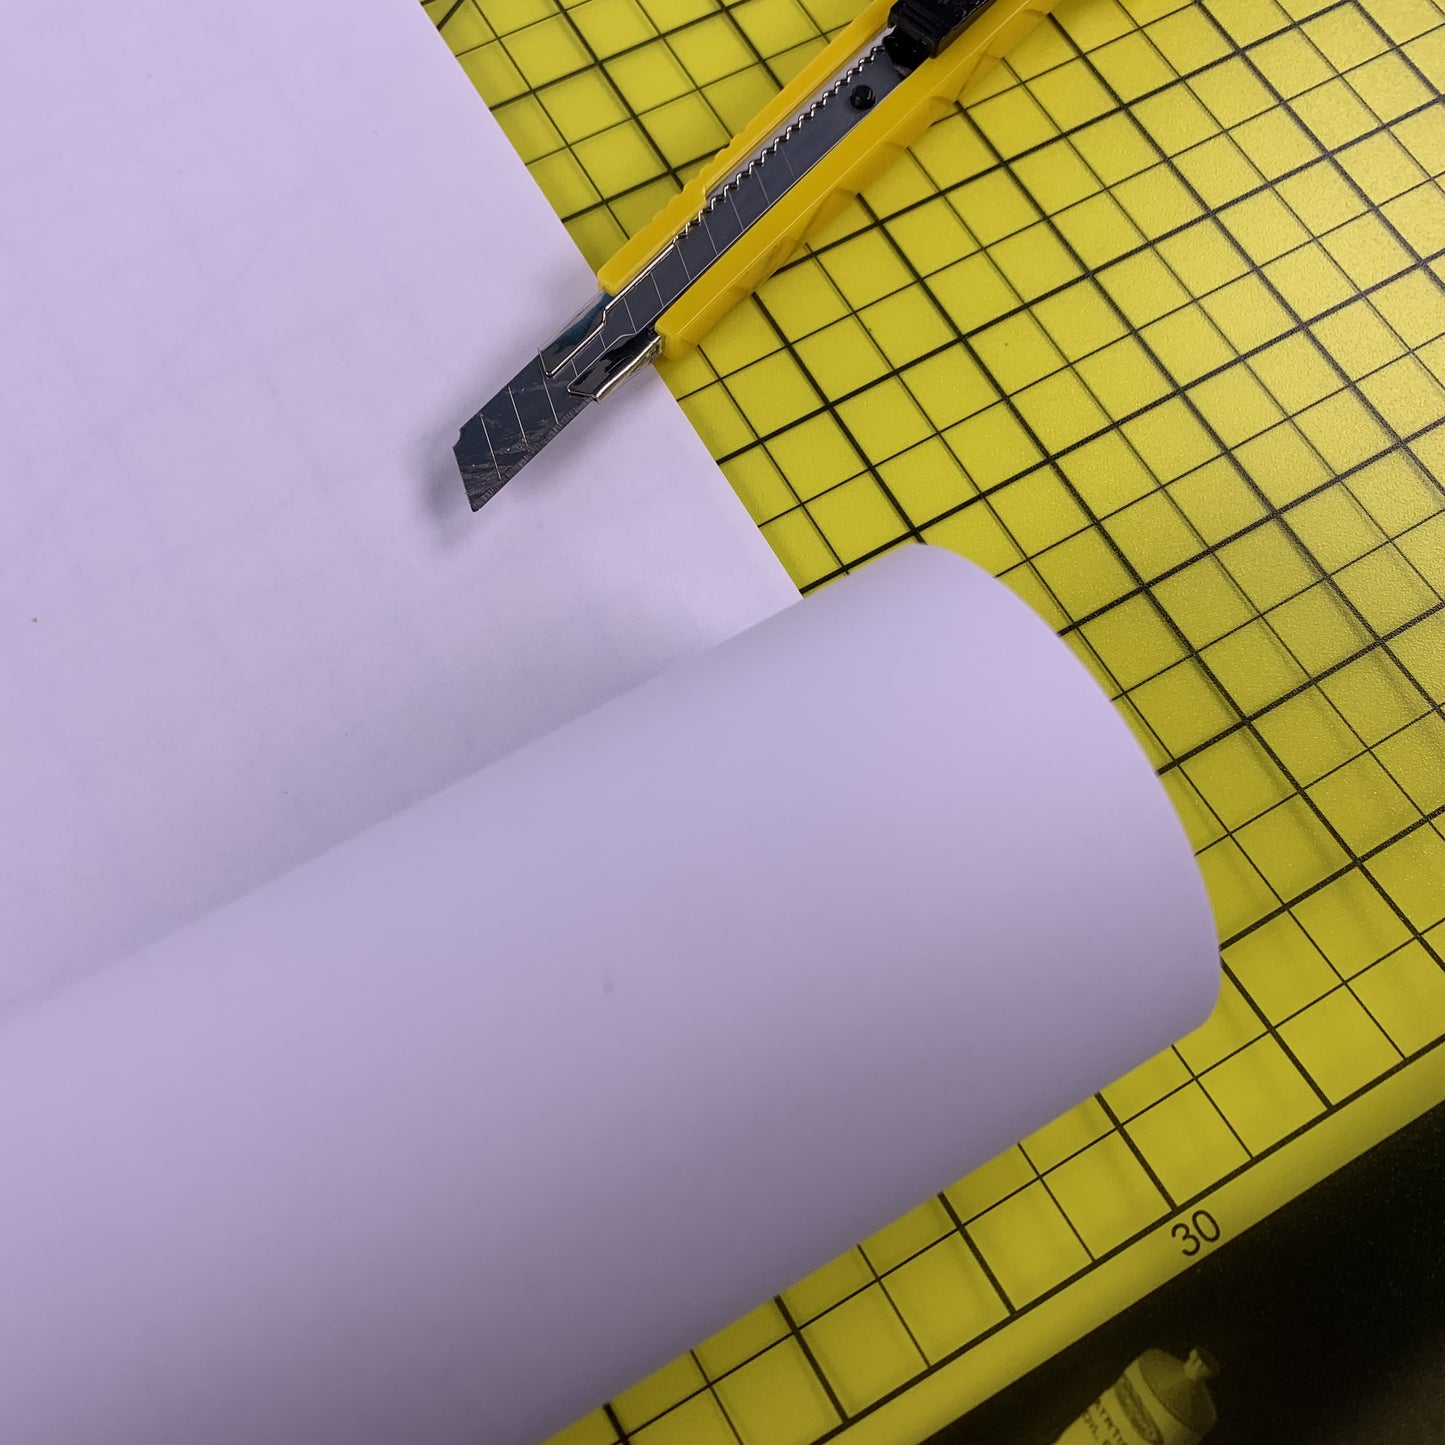 knife against drawing roll